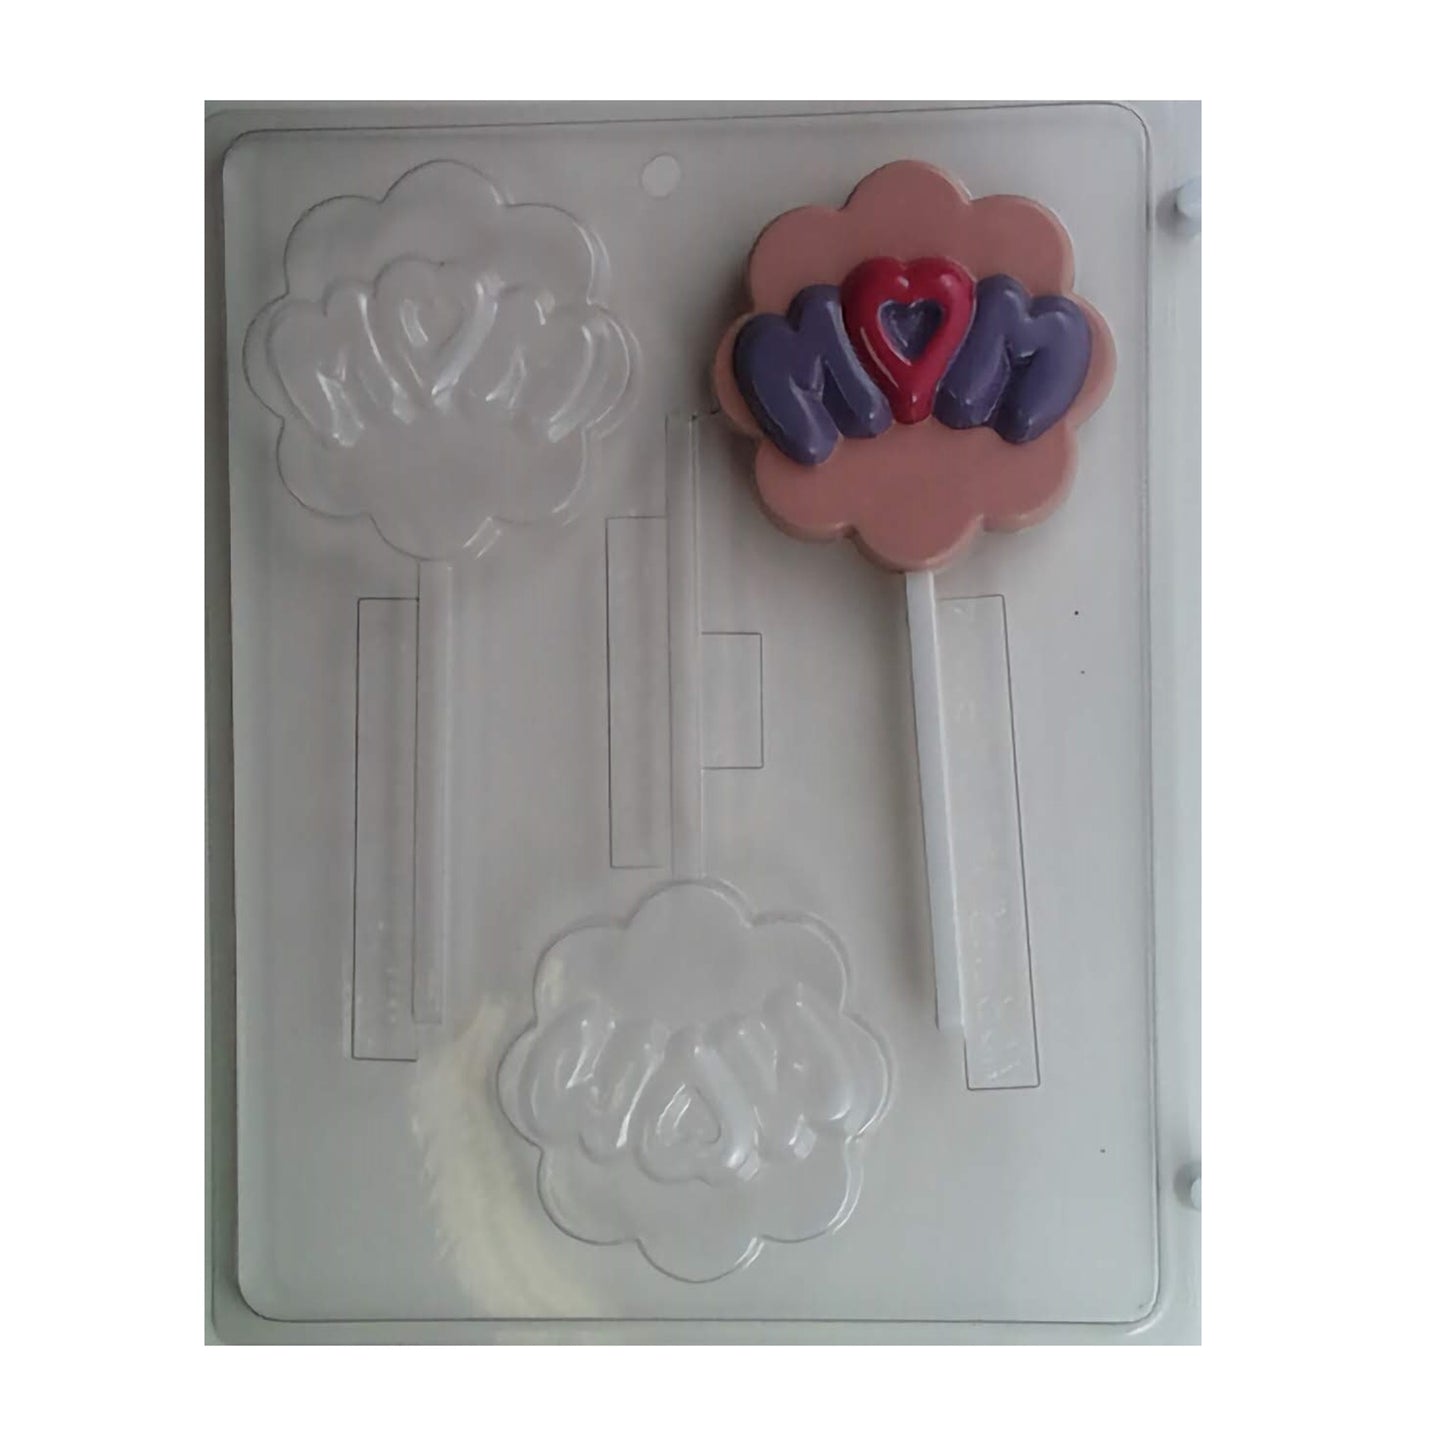 This chocolate mold is designed to celebrate motherhood, featuring two cavities with the word 'Mom' in the center, surrounded by a round scalloped edge. Each cavity includes a stick insert for making lollipops.